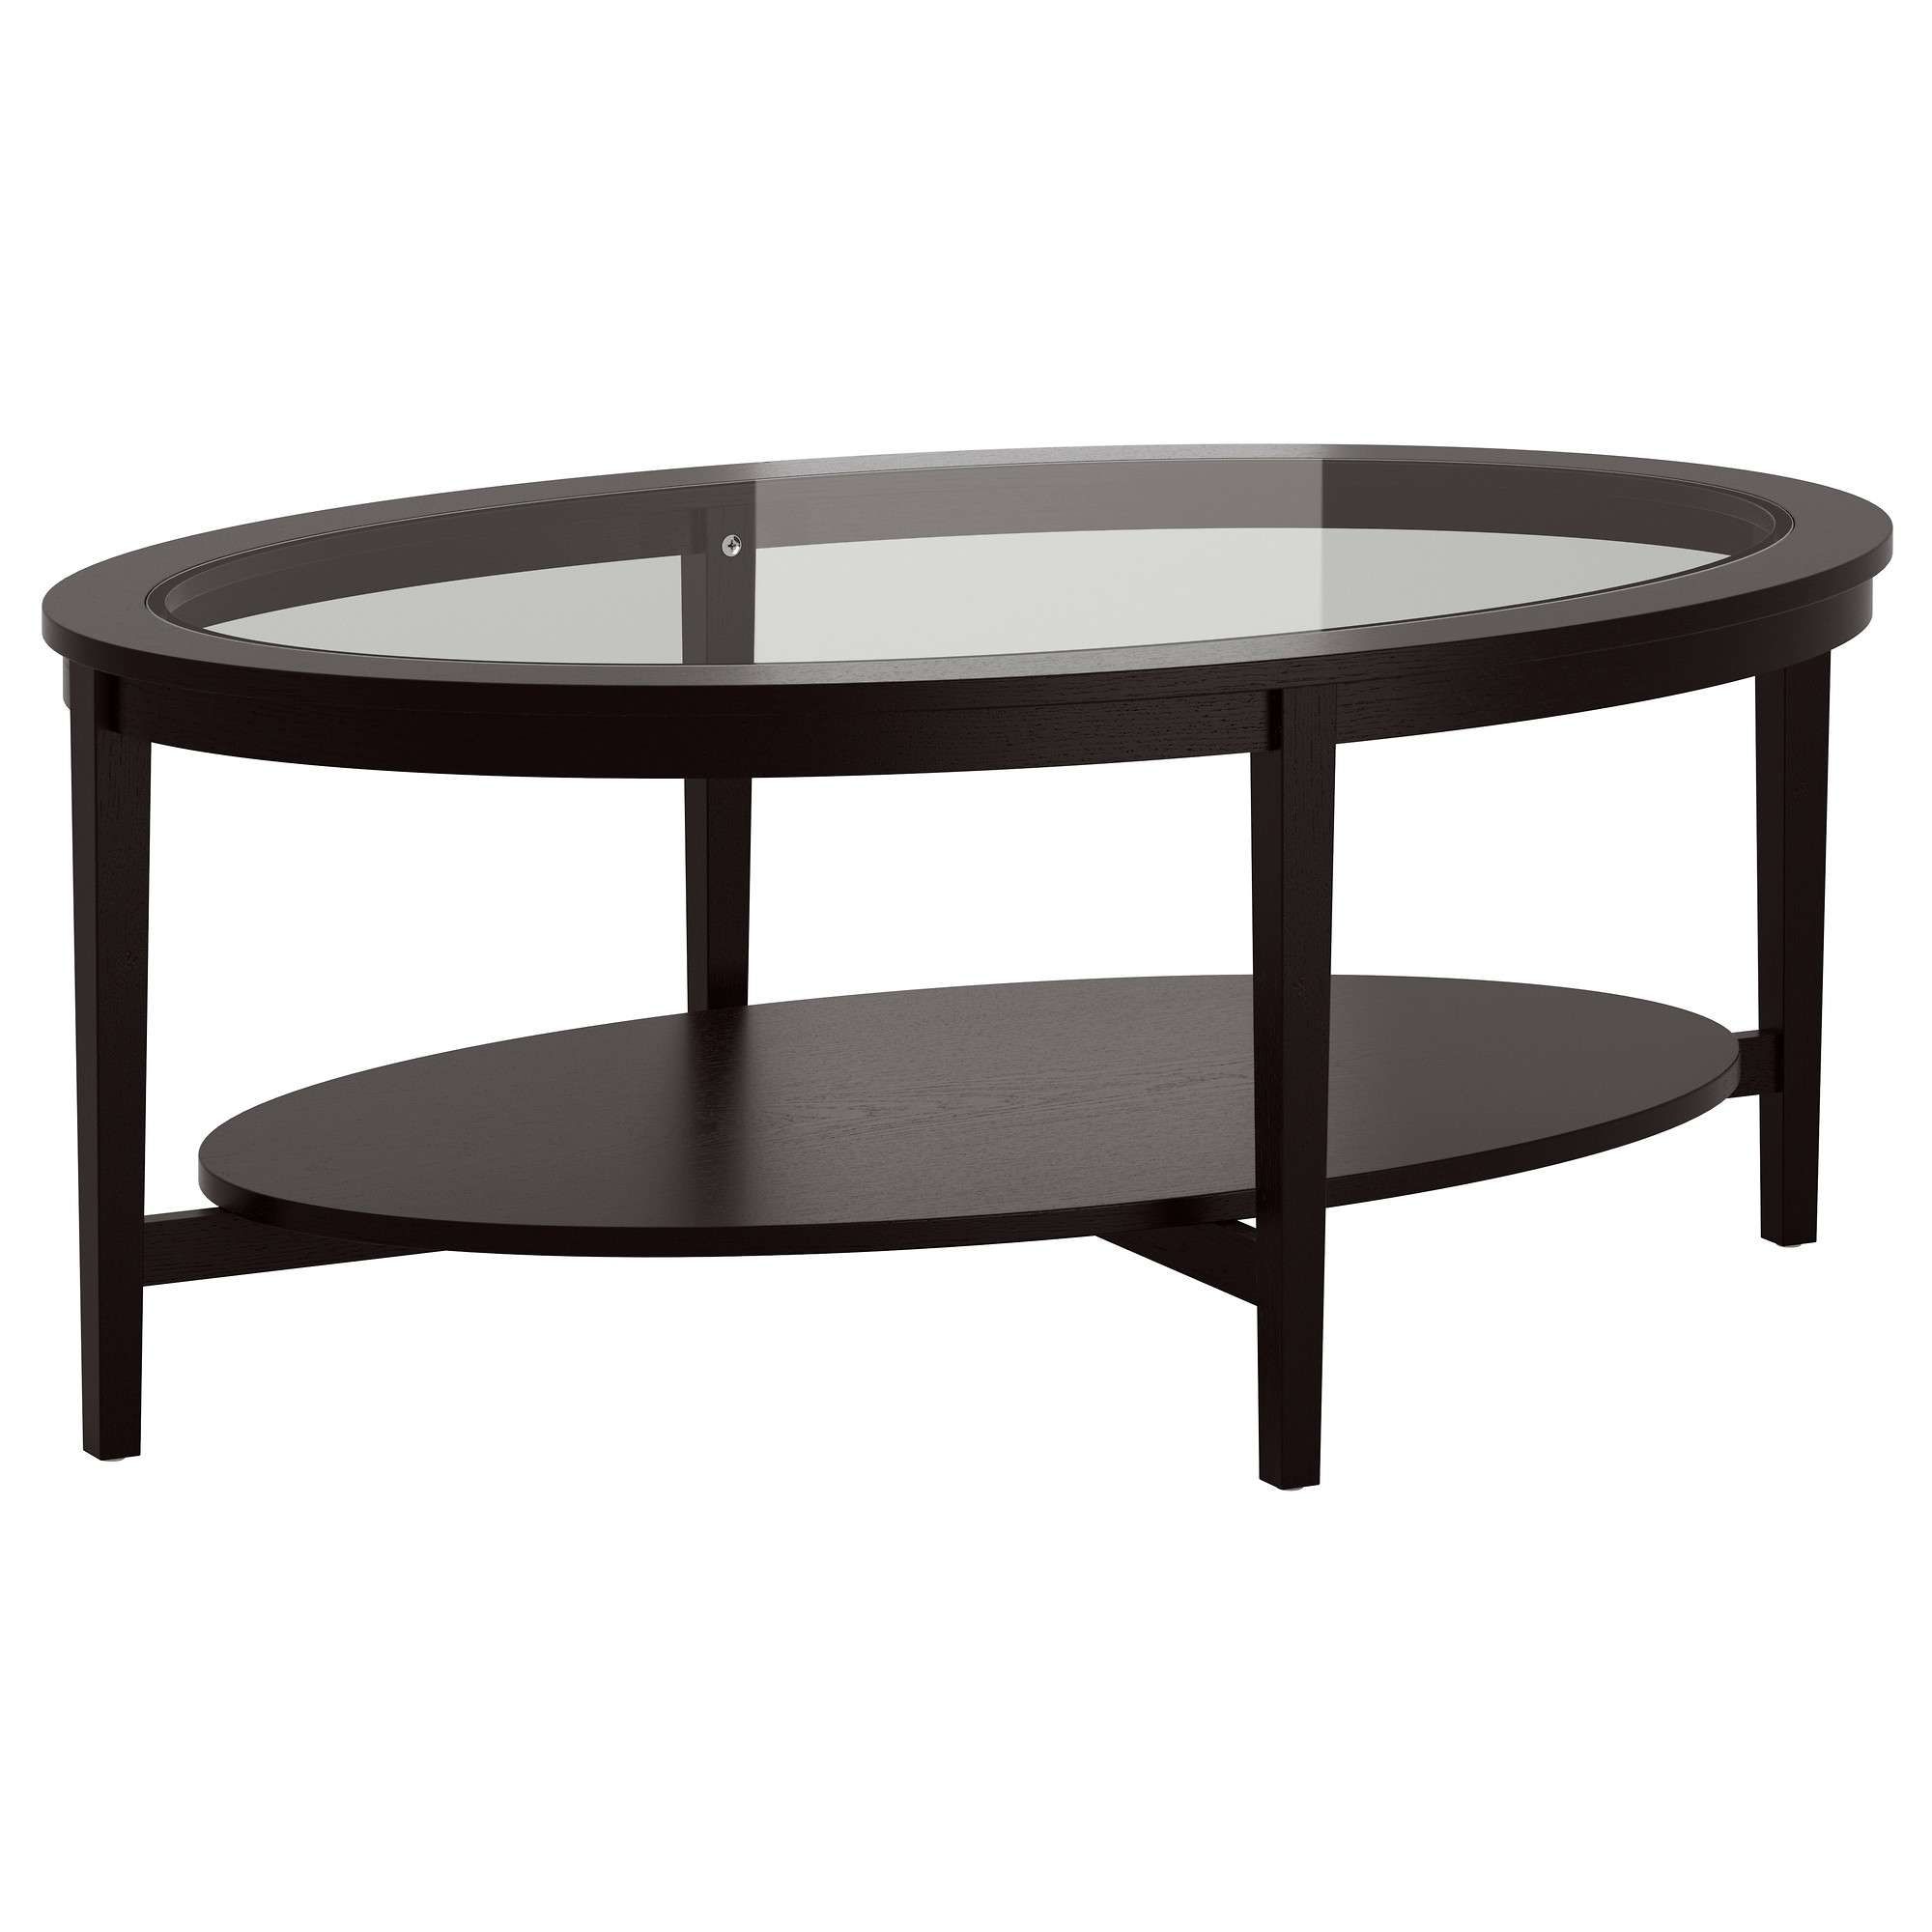 Preferred Oval Glass And Wood Coffee Tables Intended For Coffee Table : Amazing Glass Cocktail Tables Glass Top Dining (View 14 of 20)